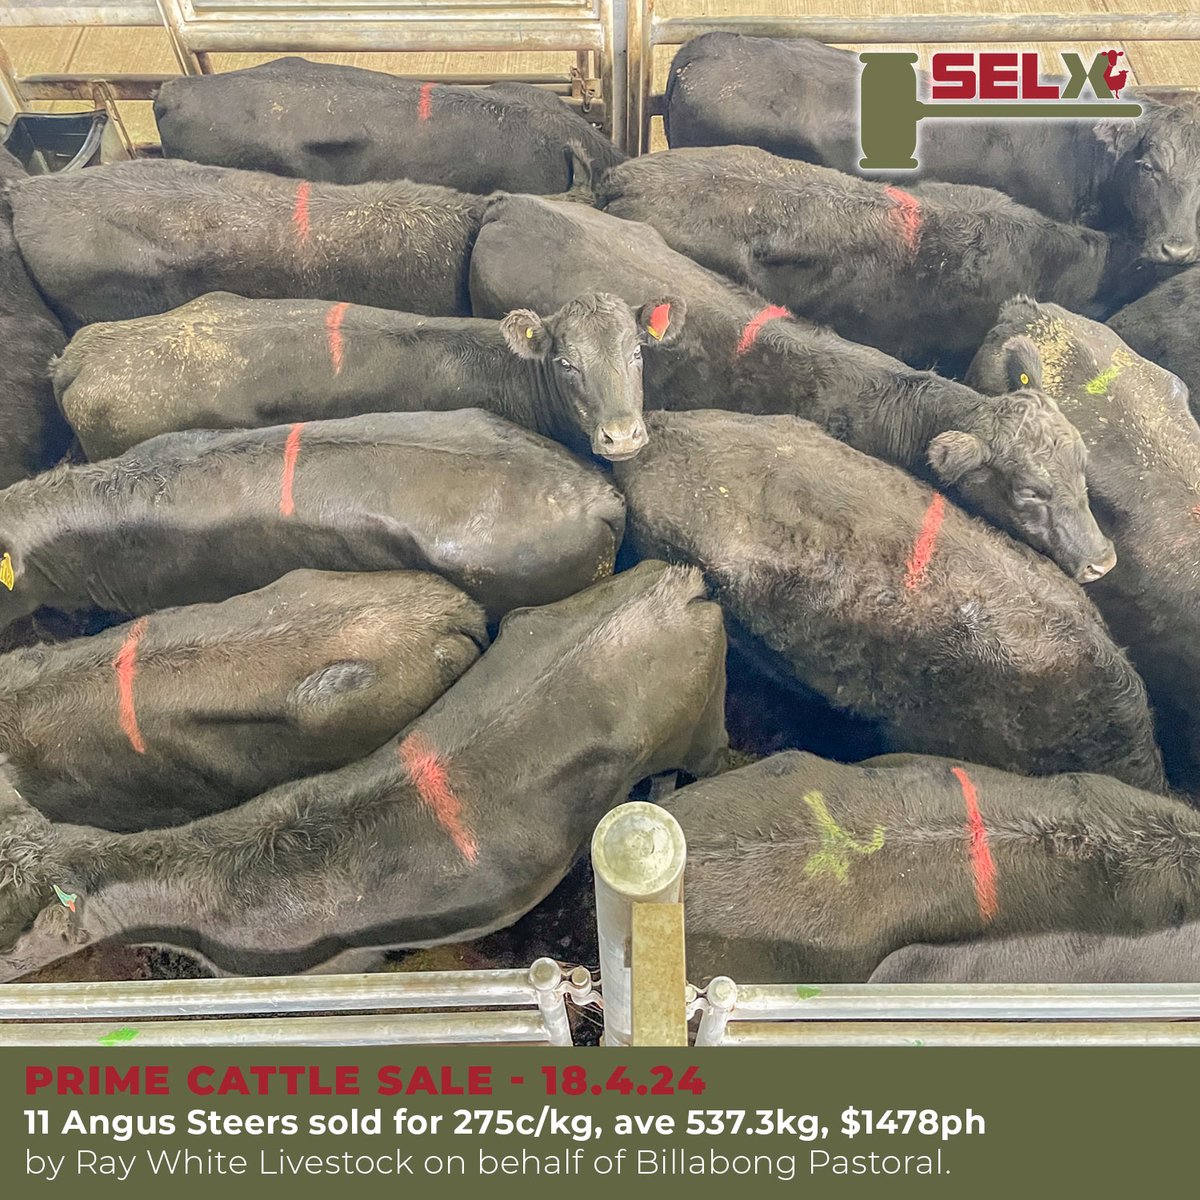 11 Angus Steers sold for 275c/kg, ave 537.3kg, $1478ph by Ray White Livestock on behalf of Billabong Pastoral.

Market report => selxnsw.com.au/market-report-…